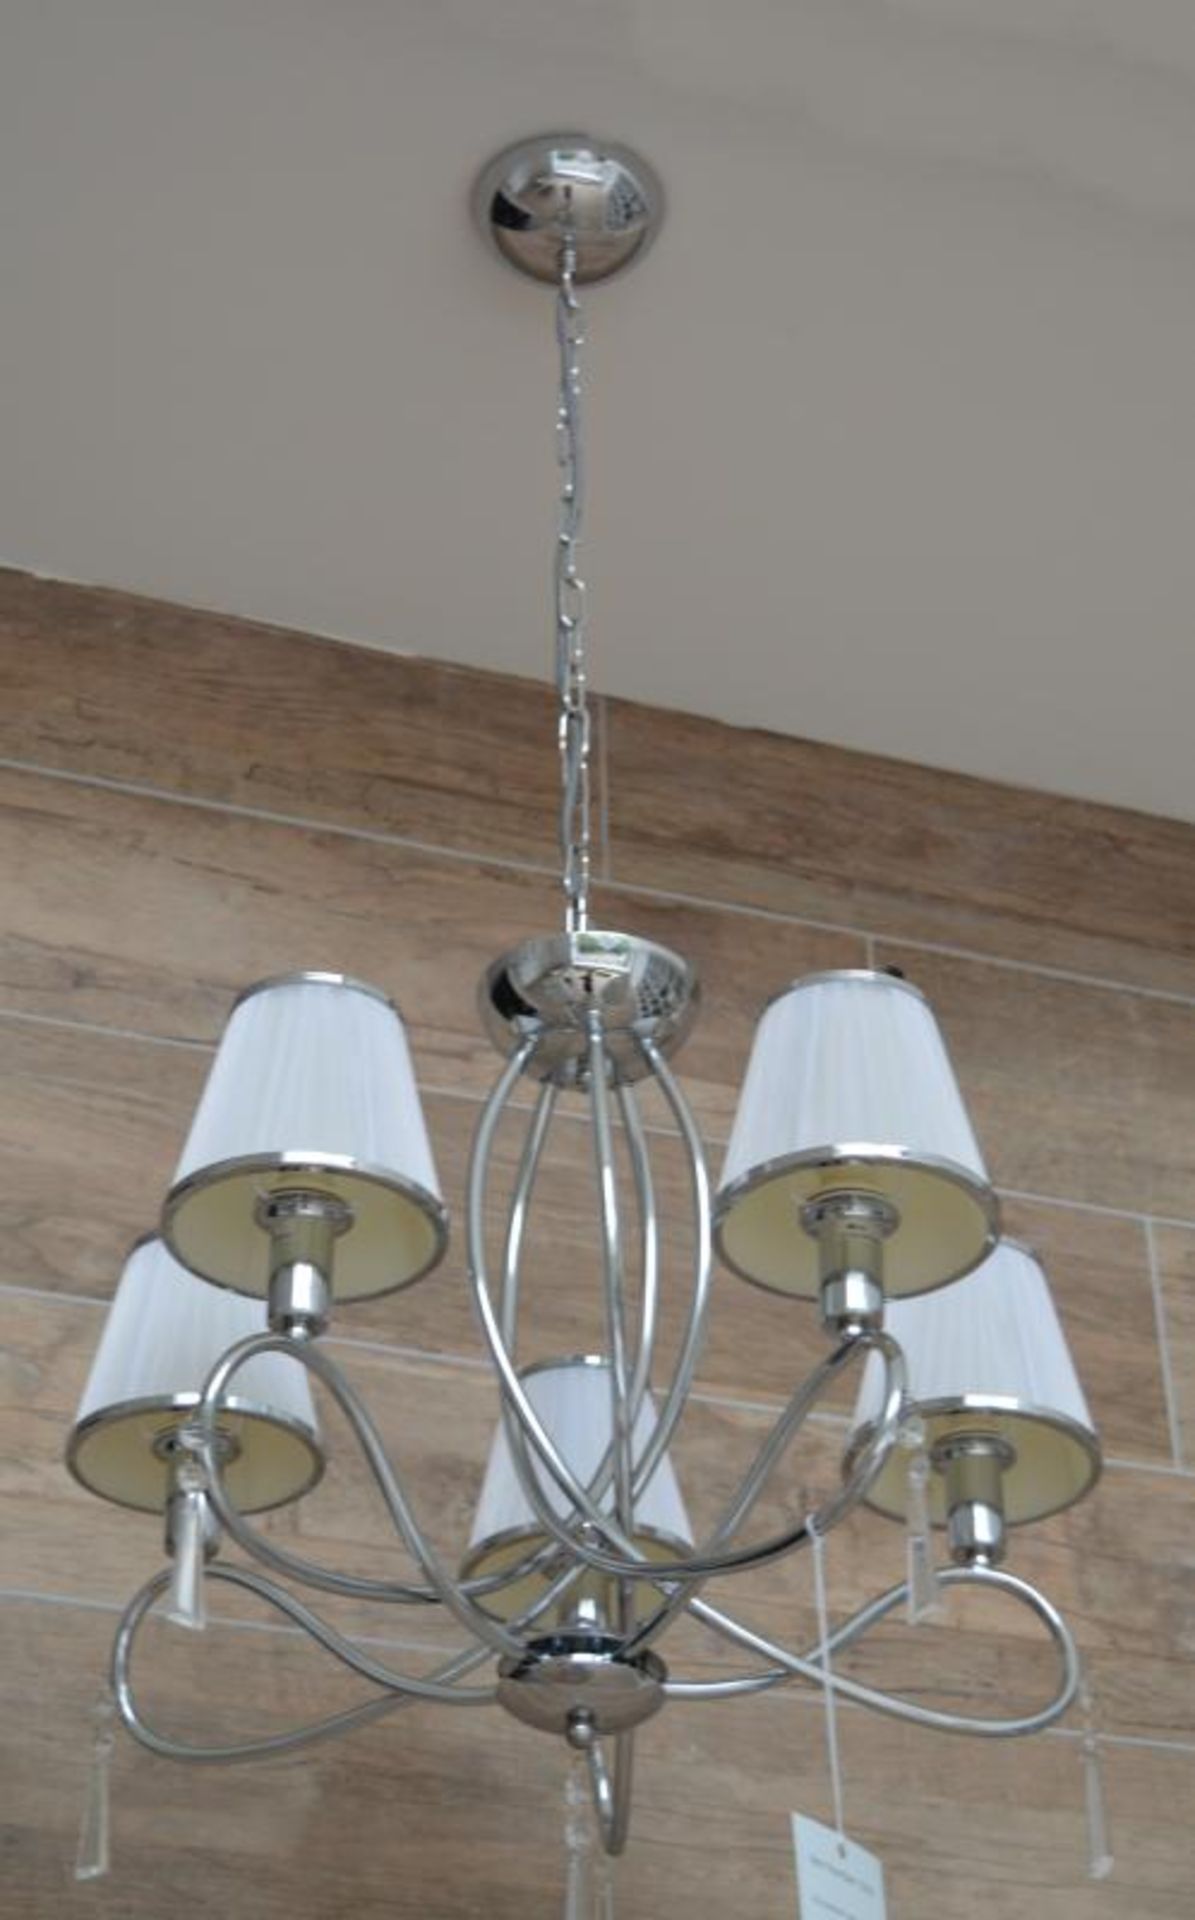 1 x Simplicity Chrome 5 Light Fitting With Glass Drops and White String Shades - Ex Display Stock - - Image 6 of 6